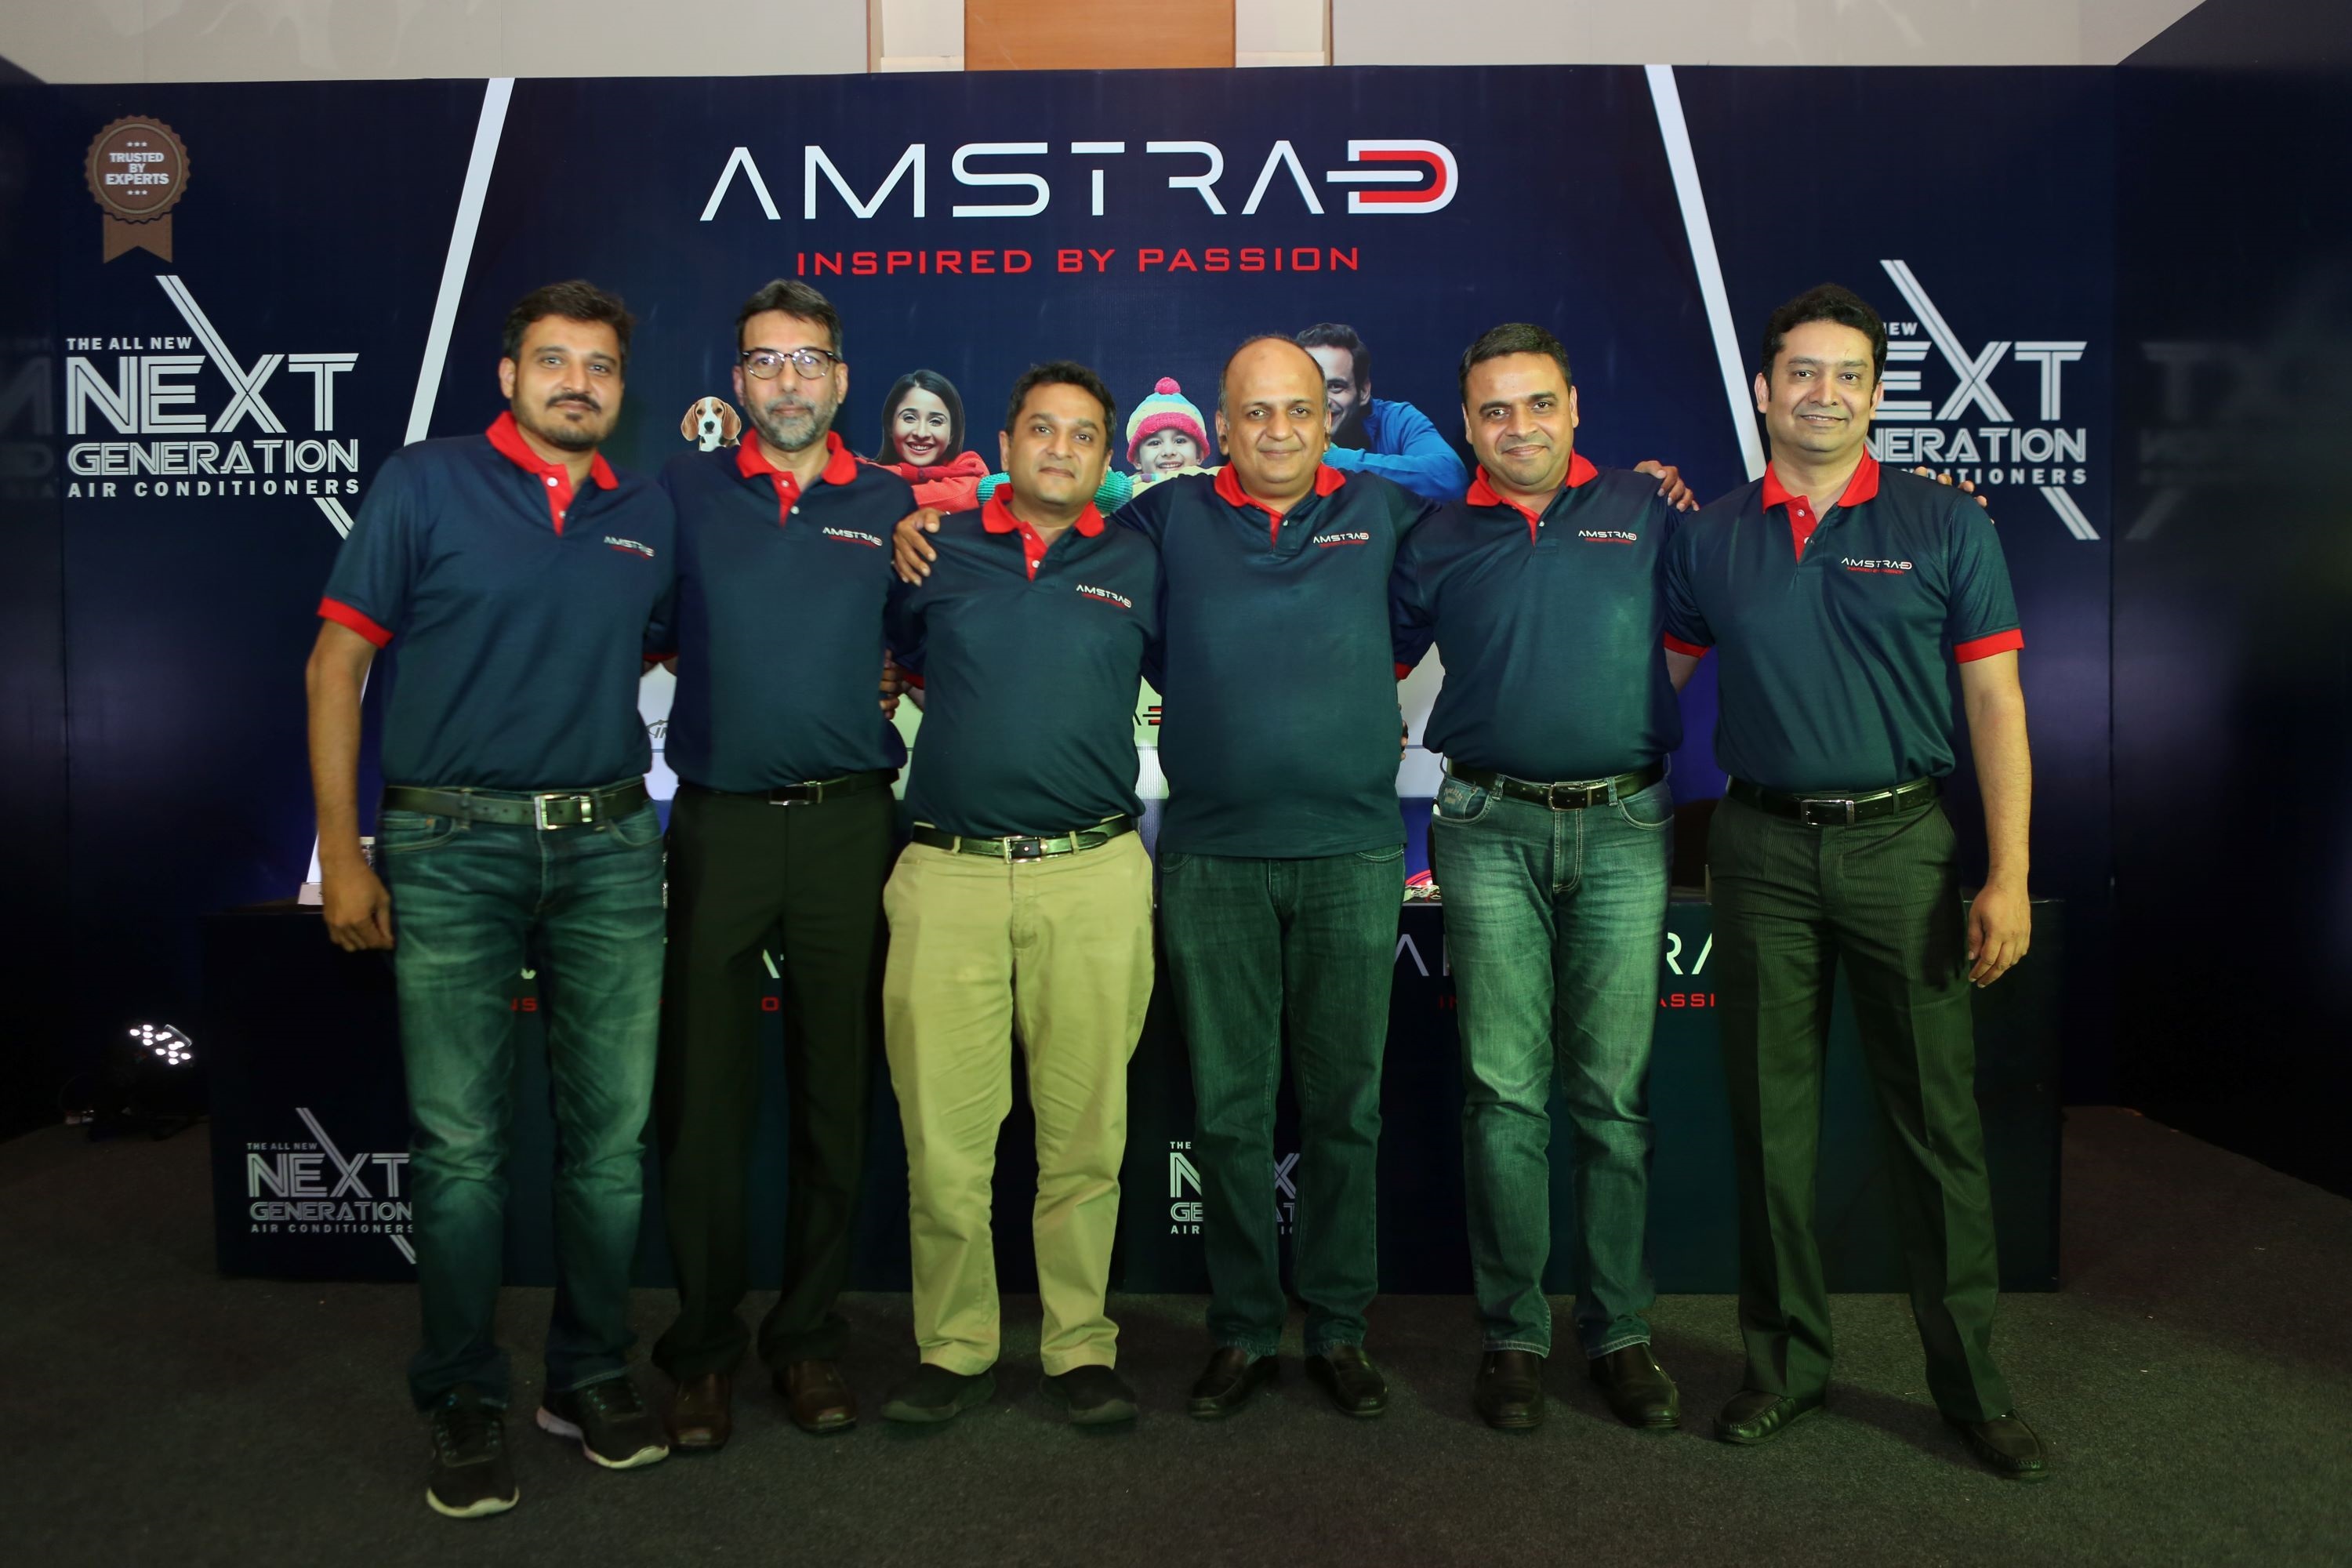  L to R - Dewang Mehta (Etronics Global Distributors LLP), Shabbir Icewala (Etronics Global Distributors LLP), Ashish Gupta (Director - Vijay Sales and OVOT Pvt. Ltd.), Nipun Singhal (MD & CEO - OVOT Pvt. Ltd.), Vivek Shukla (COO - OVOT Pvt. Ltd.) and Ajay Dugar (Etronics Global Distributors LLP) at One Vision One Team, which has emerged in the Consumer Electronics and Appliances Industry as a new force, now presents Next Generation Quality, Technology and Services (QST) to consumers under the “AMSTRAD” brand. 